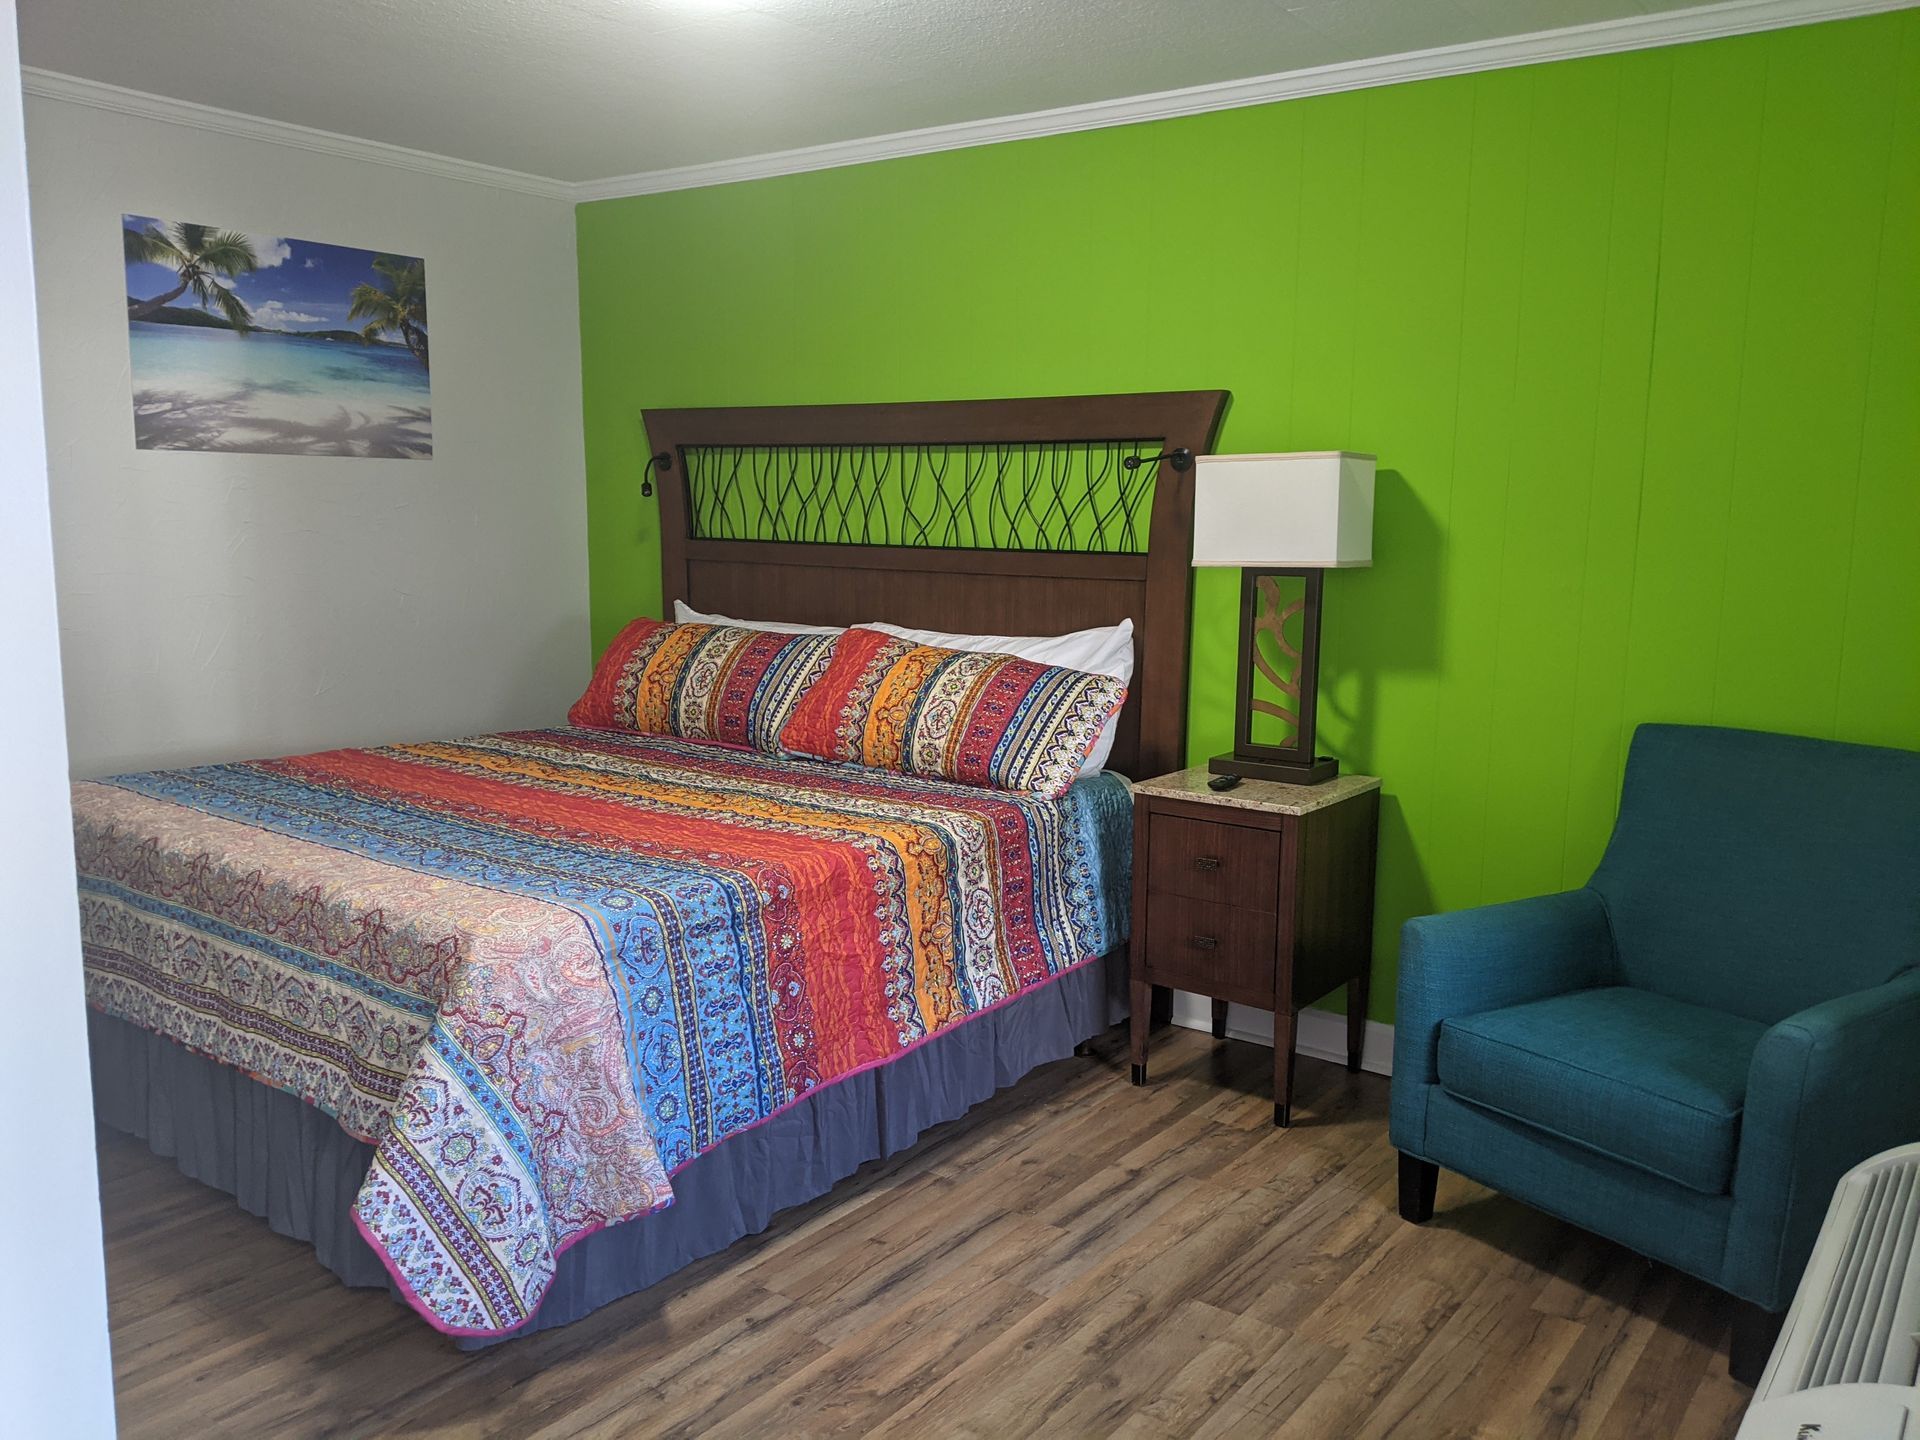 A hotel room with a bed , chair , nightstand , lamp and green wall.